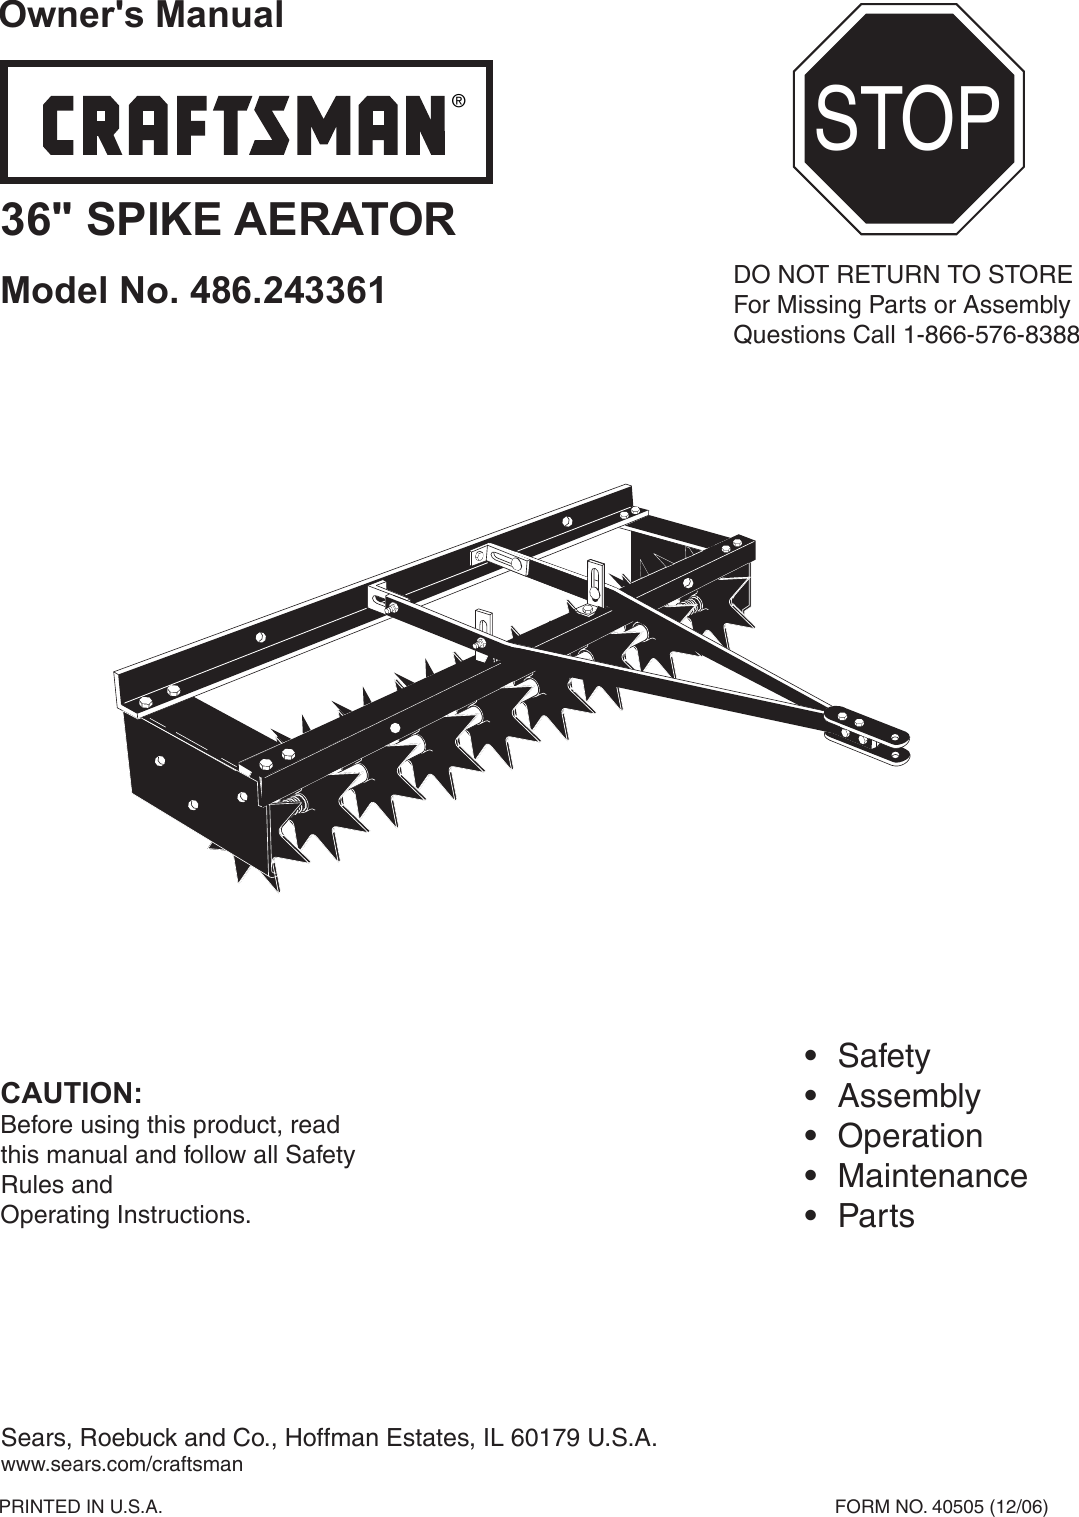 Page 1 of 8 - Craftsman Craftsman-36-In-Spike-Aerator-Owners-Manual-  Craftsman-36-in-spike-aerator-owners-manual